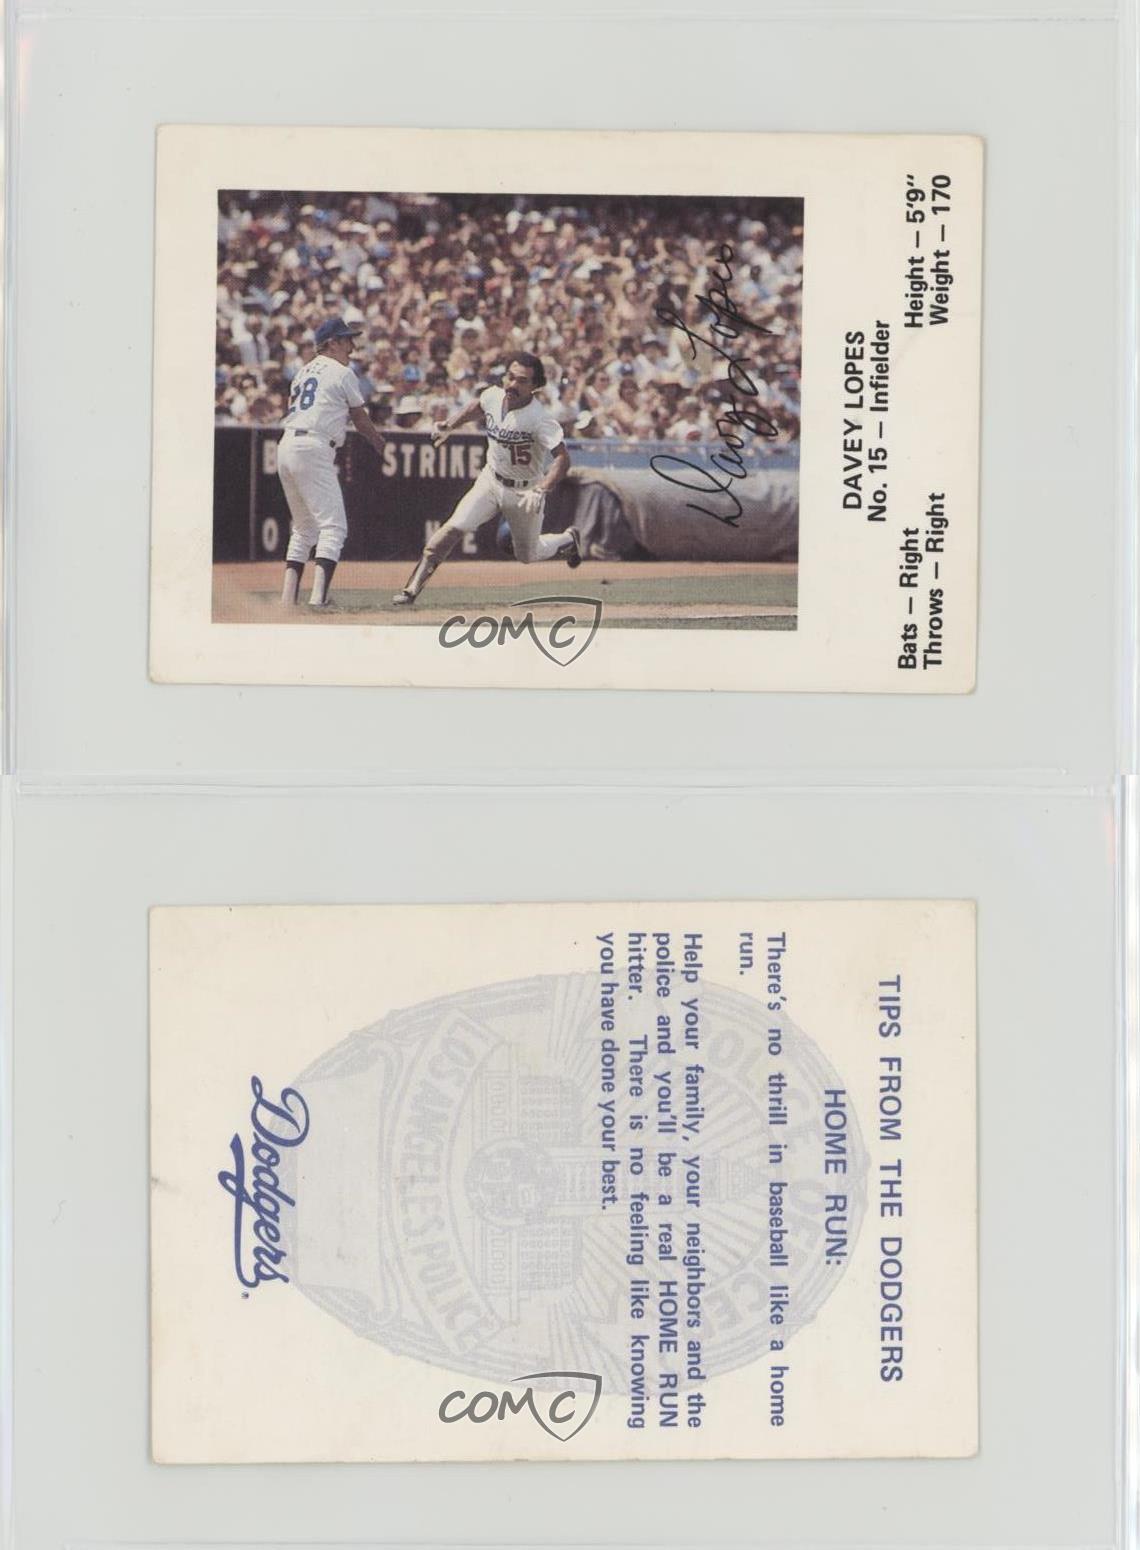 1980 Los Angeles Dodgers Police Davey Lopes #15